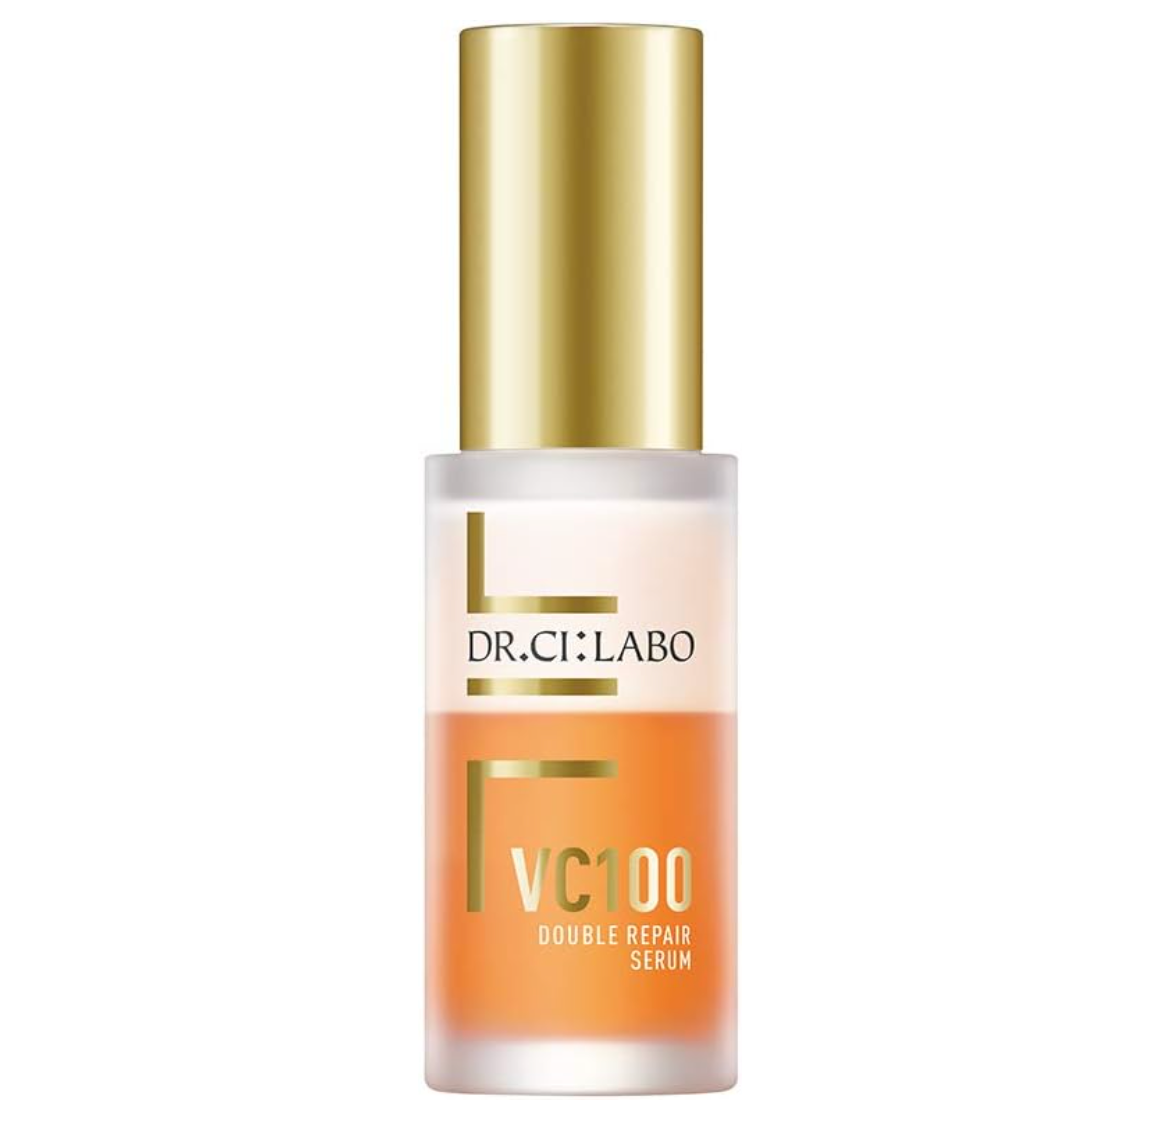 Dr.Ci:Labo Vc100 Double Repair Serum Reduces & Prevents Wrinkles 30ml - Japanese Serum